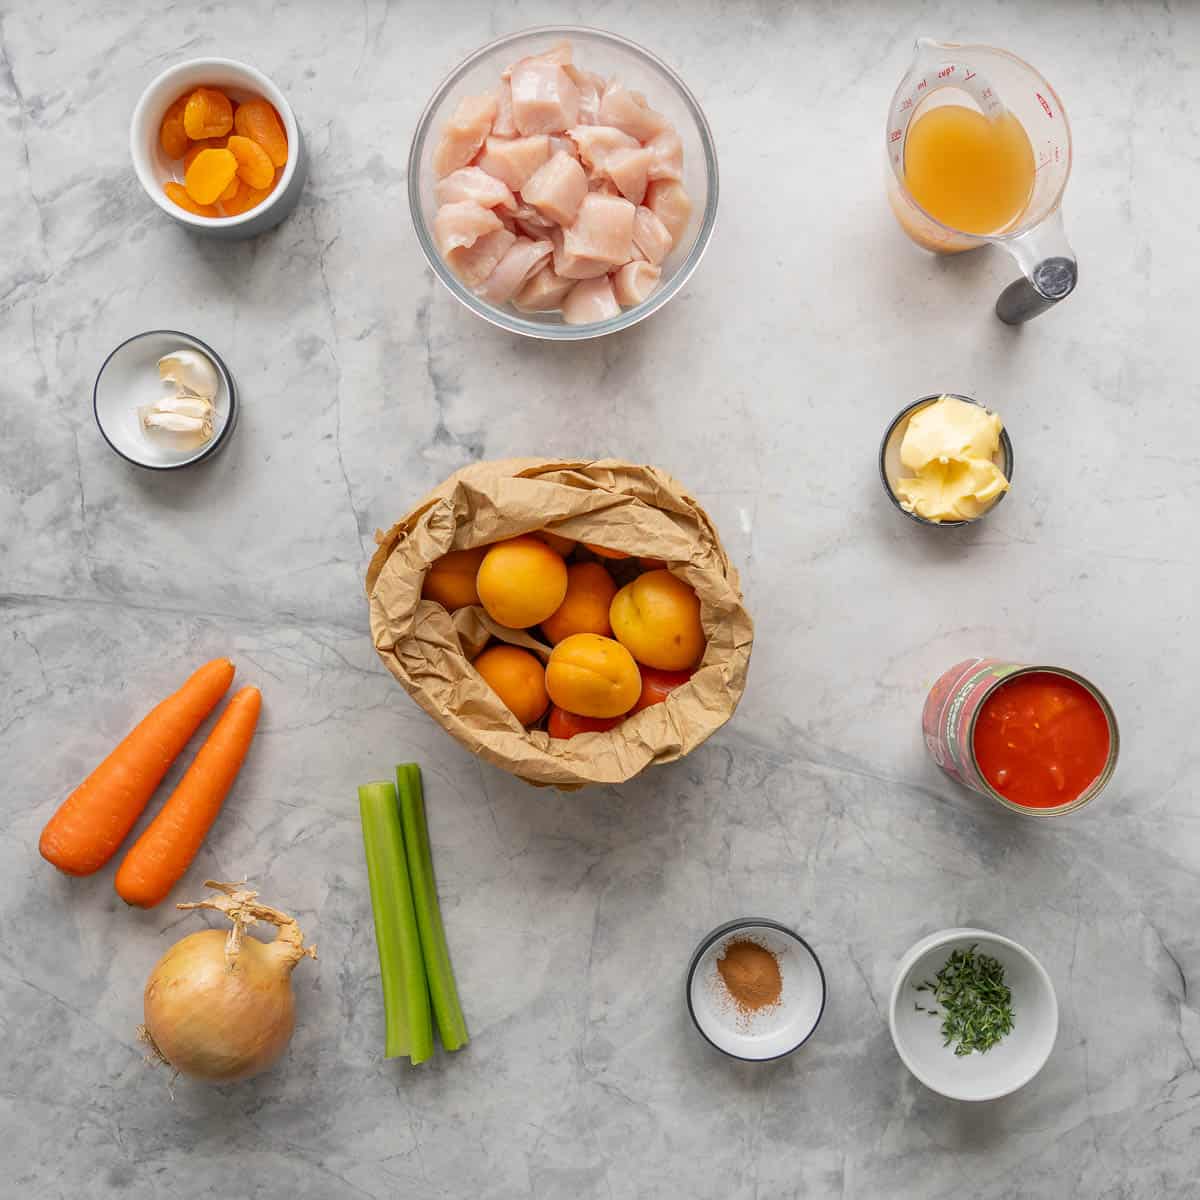 All the ingredients to make the apricot chicken laid out on the bench 